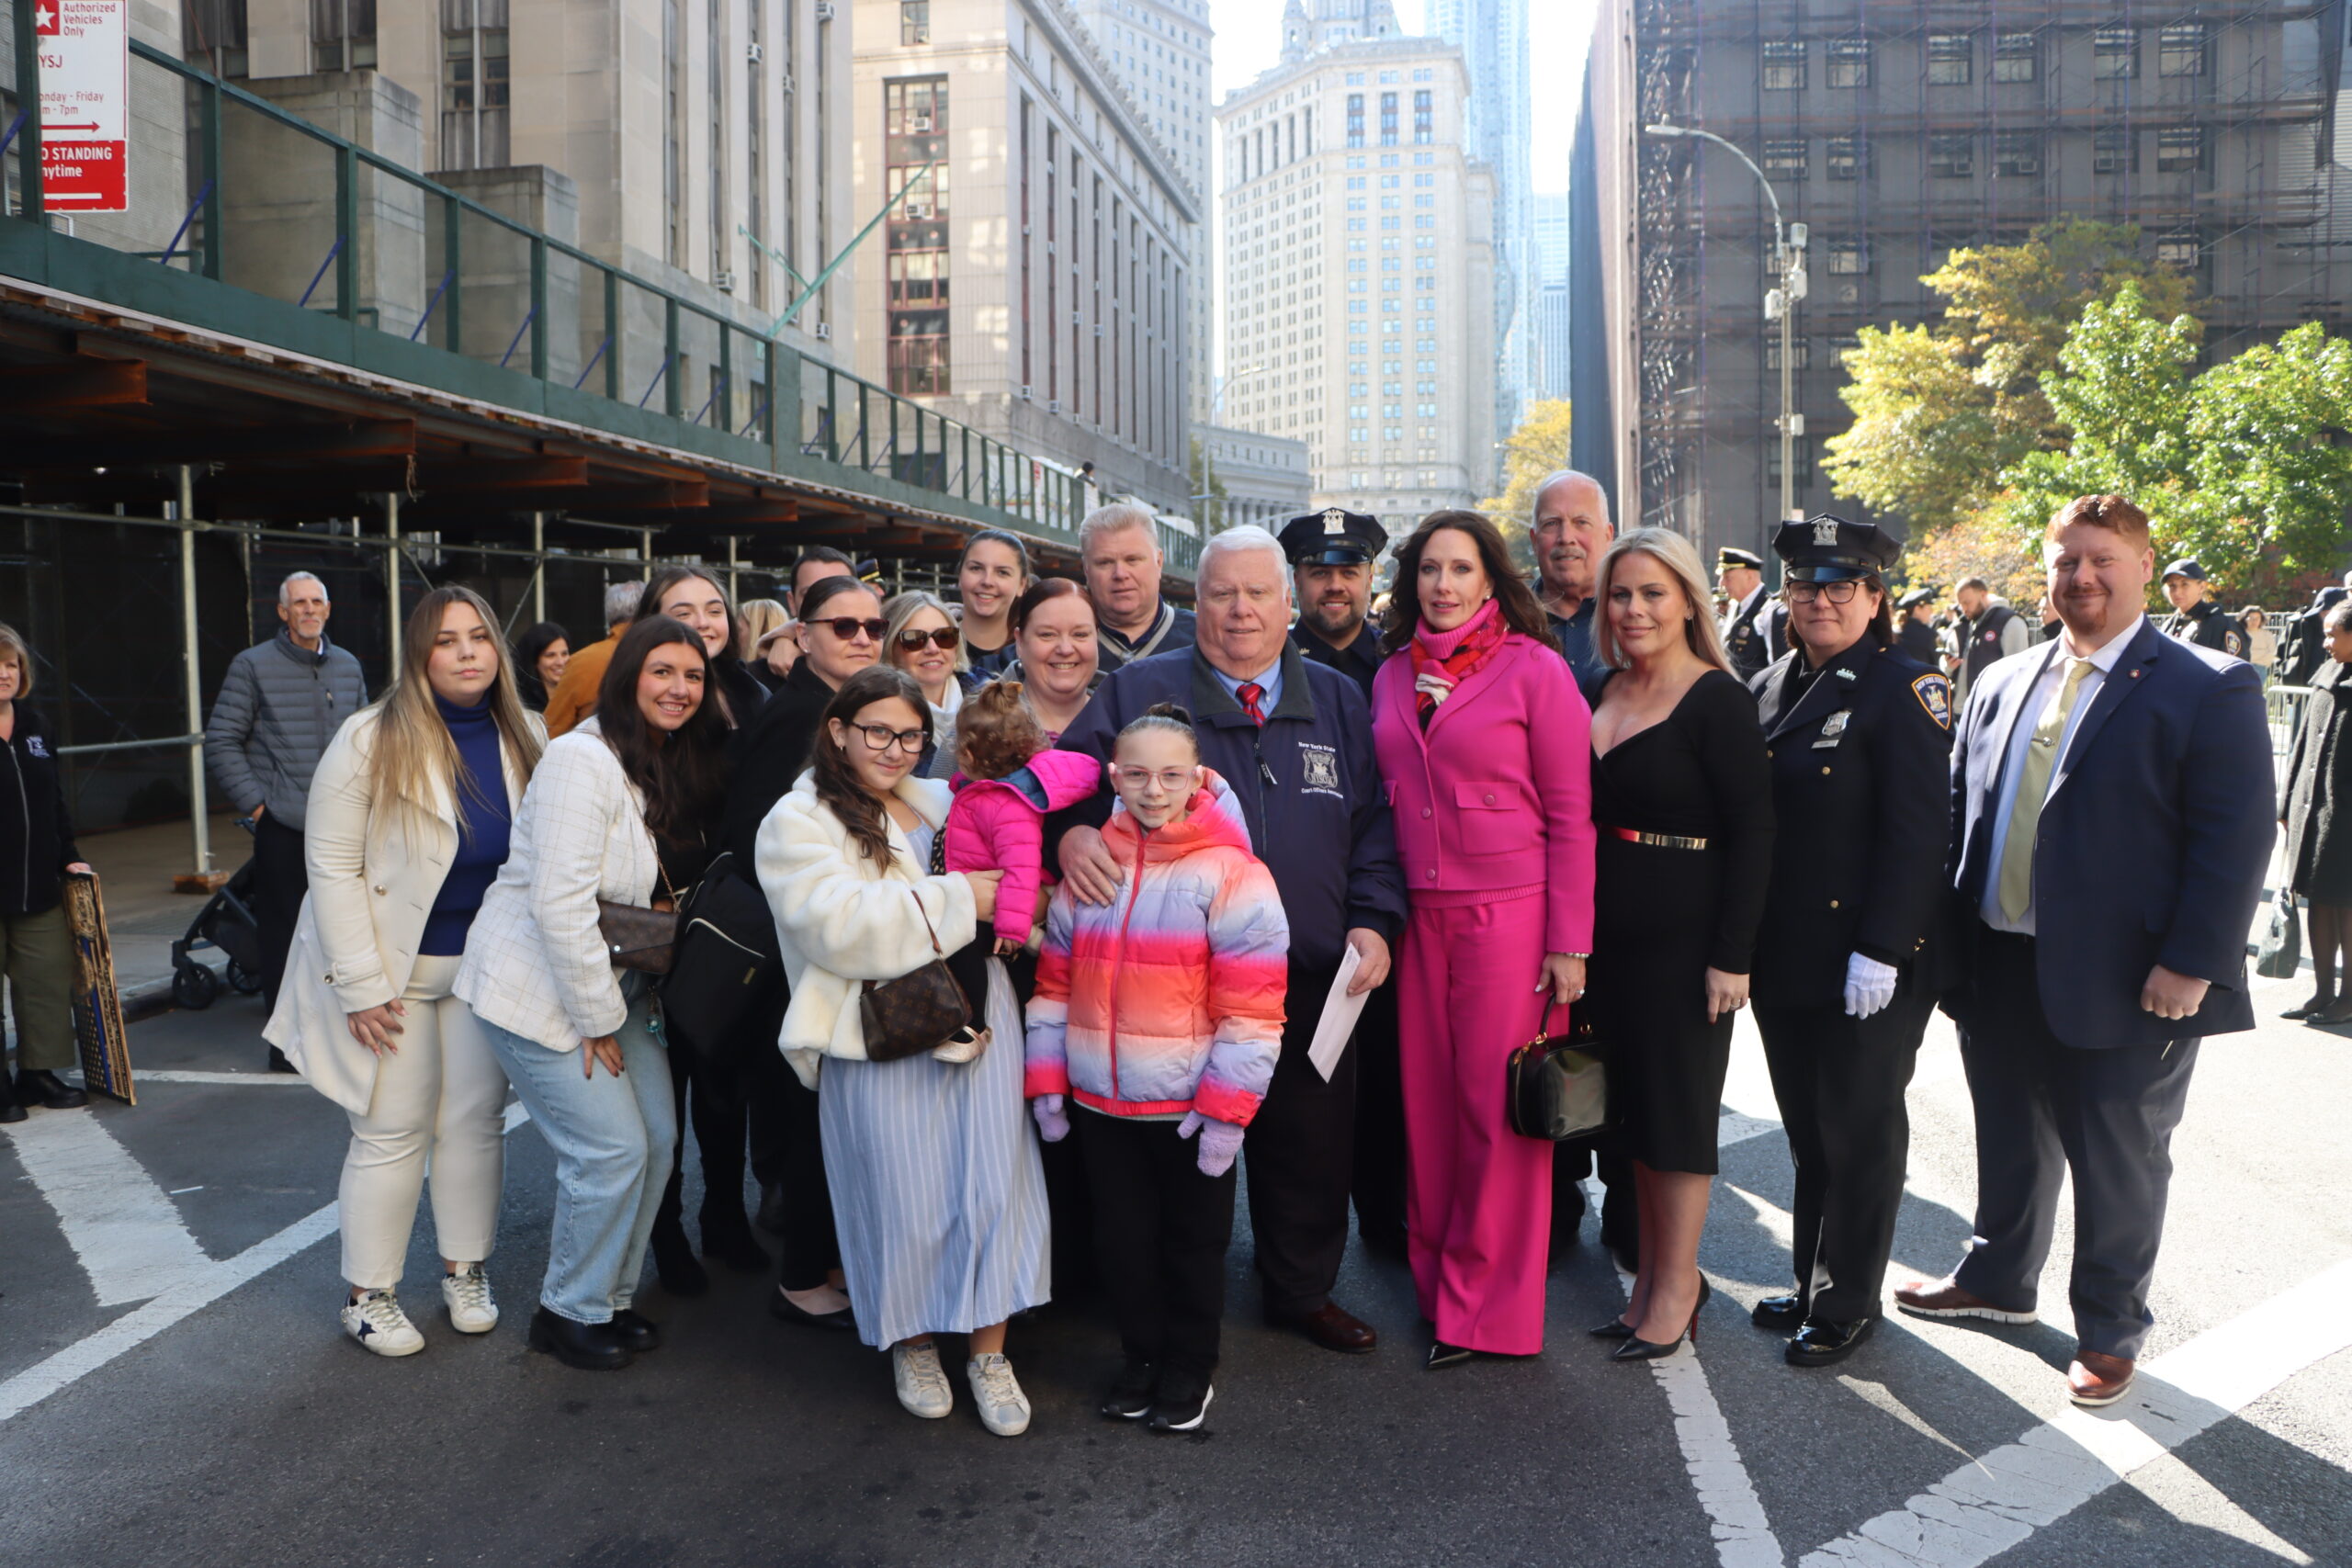 Dennis Quirk, surrounded by his family and close friends, including daughter, Hon. Susan Quirk (third from right), a judge in Kings County Family Court.